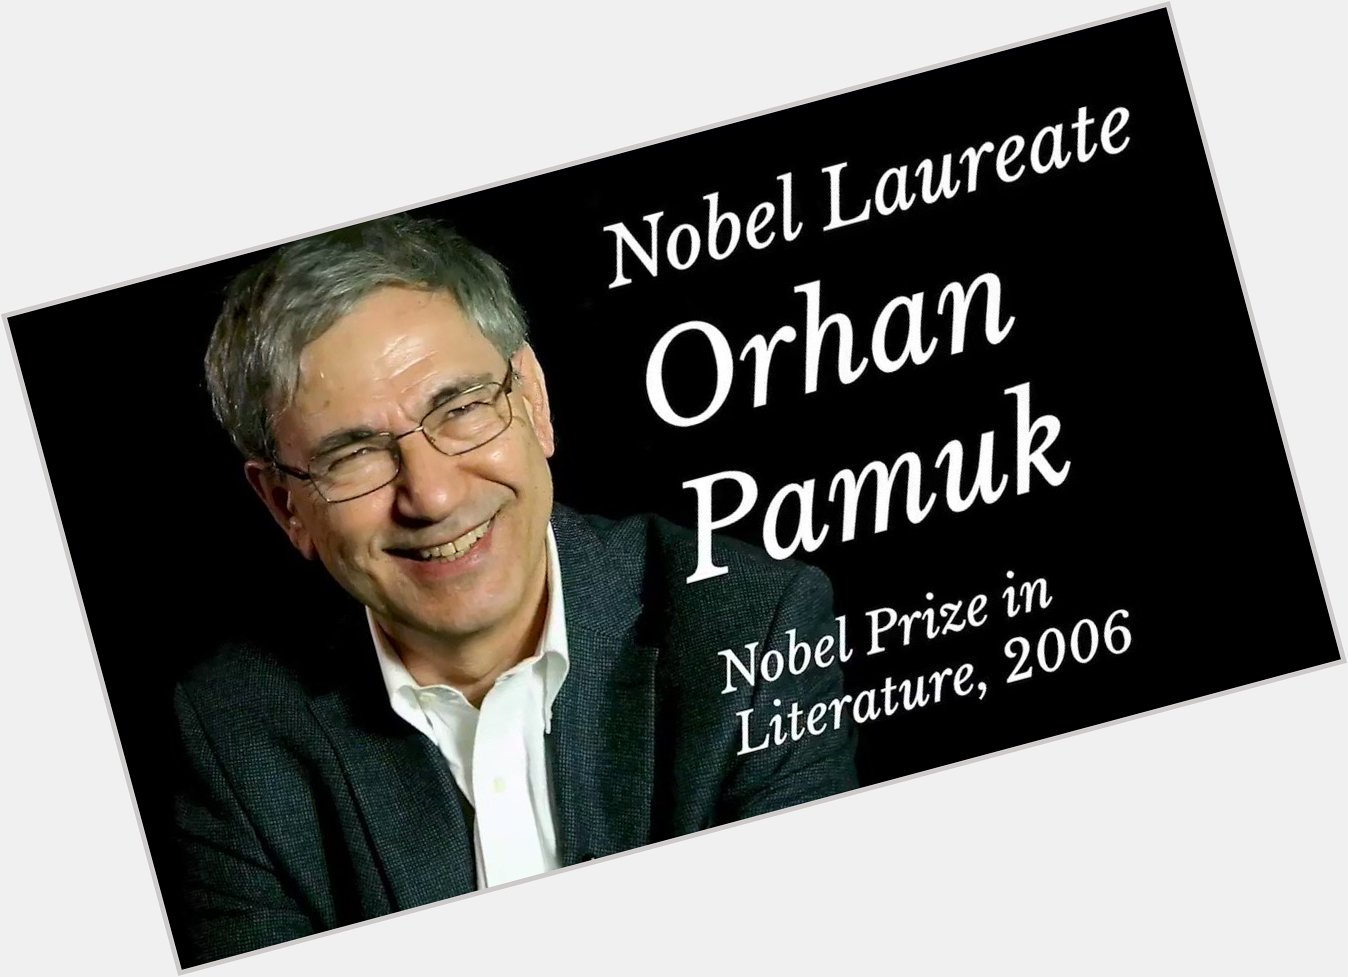 Happy birthday, Orhan Pamuk! Here he gives us an insight into what life is like as a Nobel Laureate. 